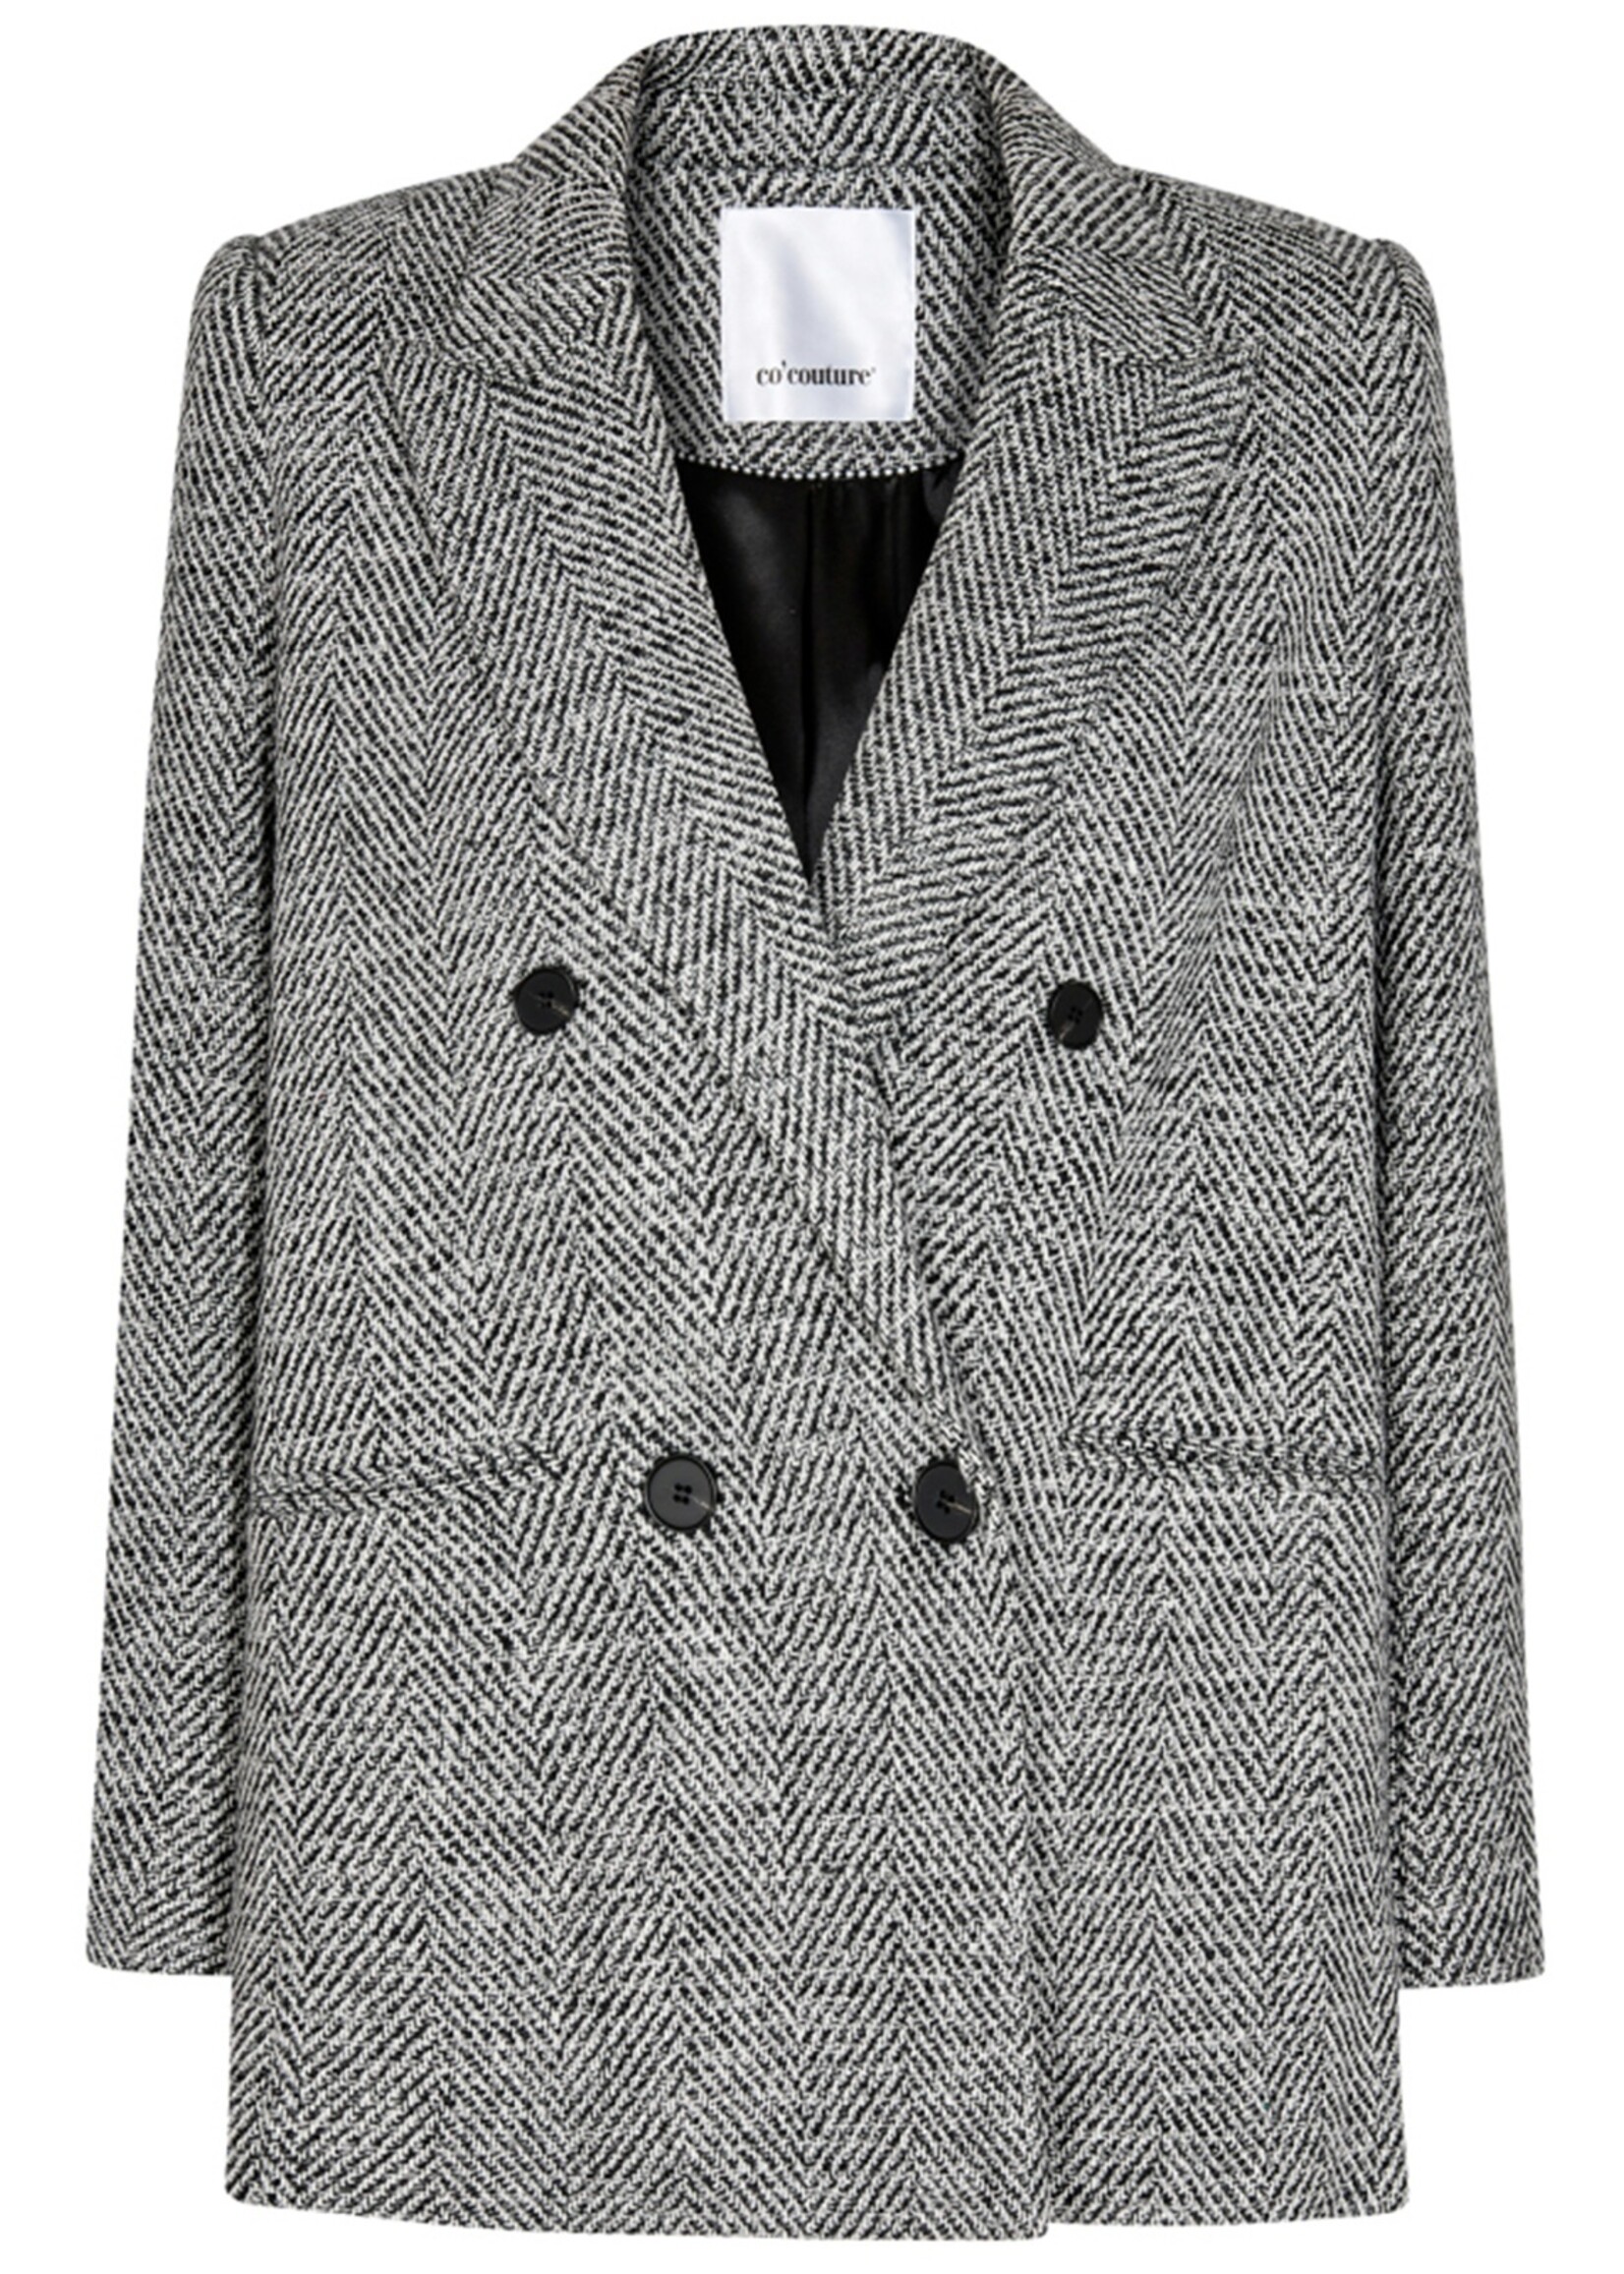 Co'Couture Ina CC herring oversize Blazer